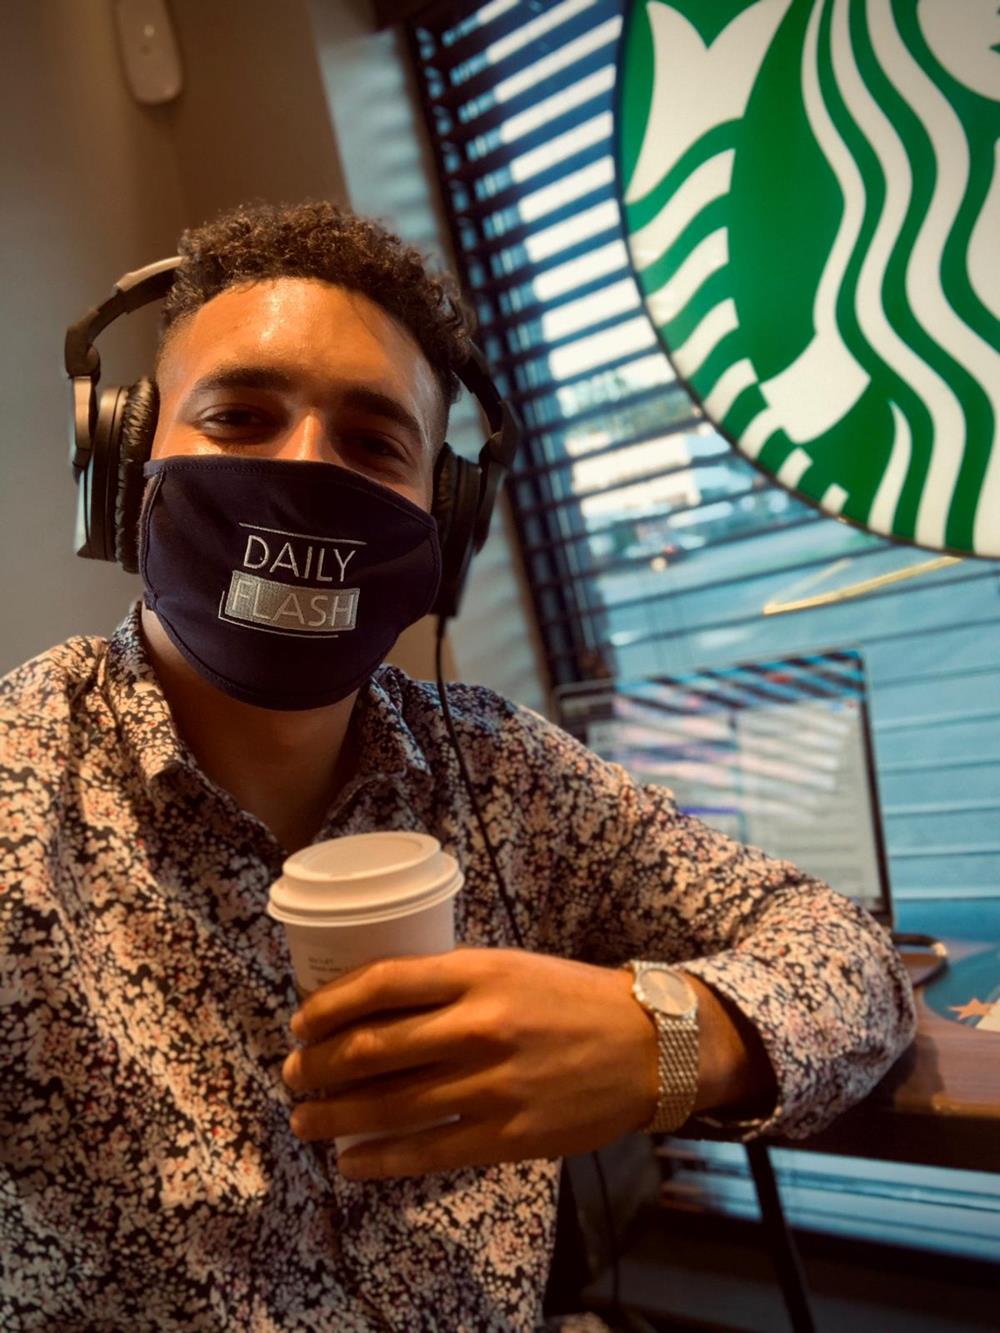 a man wearing headphones and a face mask holding a coffee cup